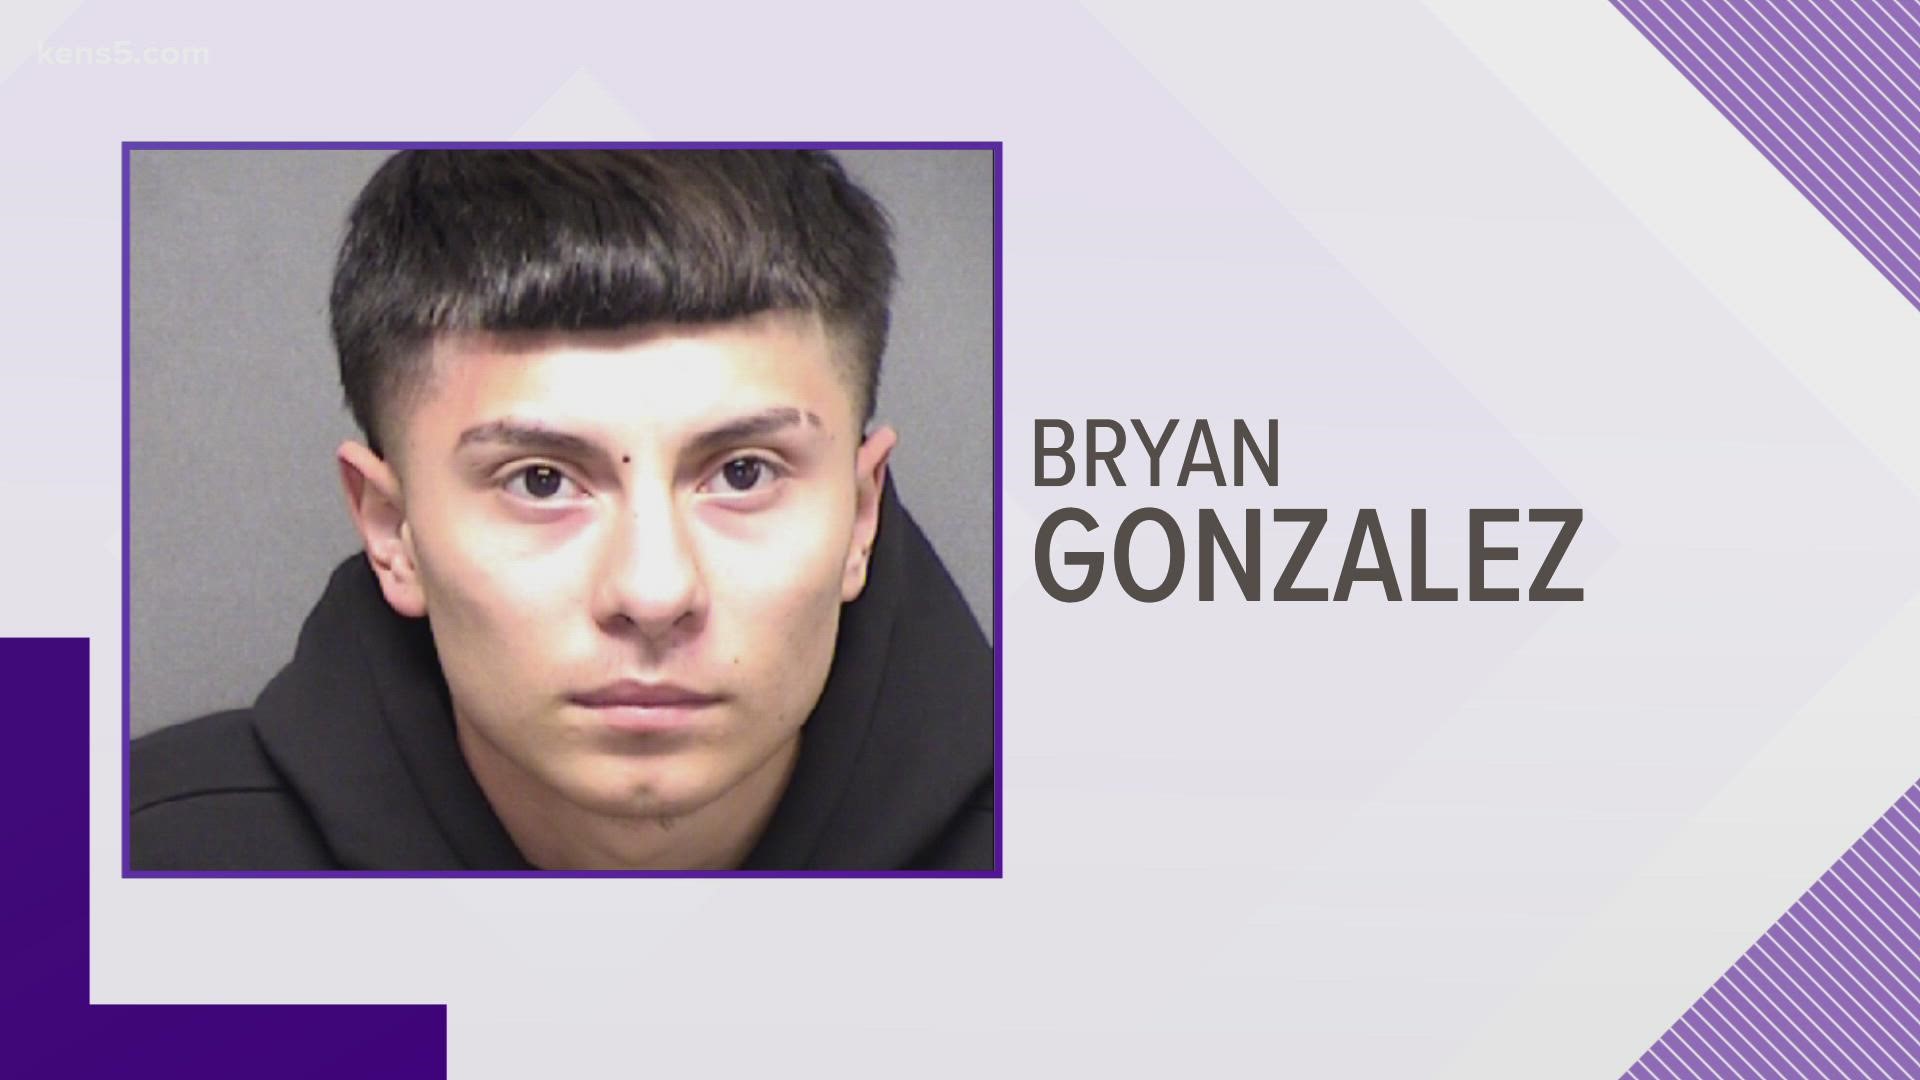 Bryan Gonzalez is accused of shooting and killing a 37-year-old man early Monday morning.